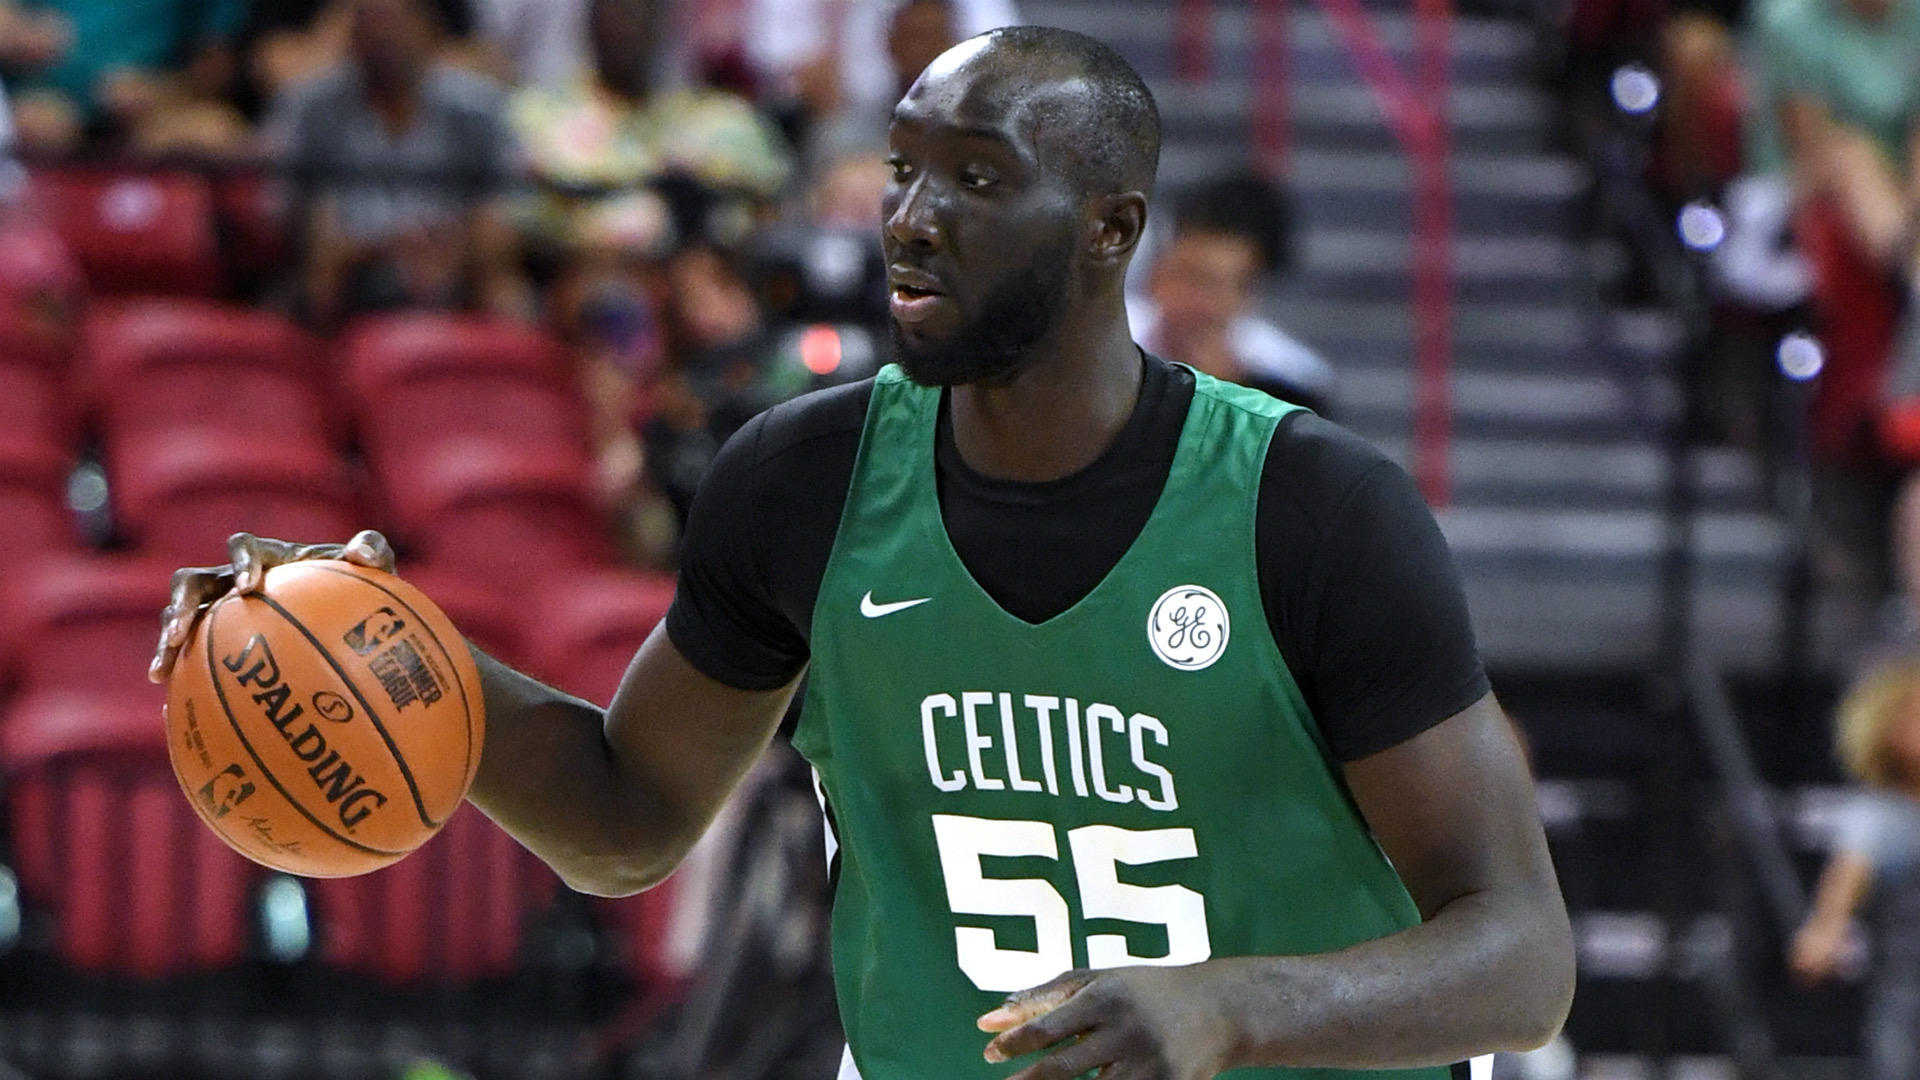 Tacko Fall is one of the most intriguing rookies this season due to his rid...